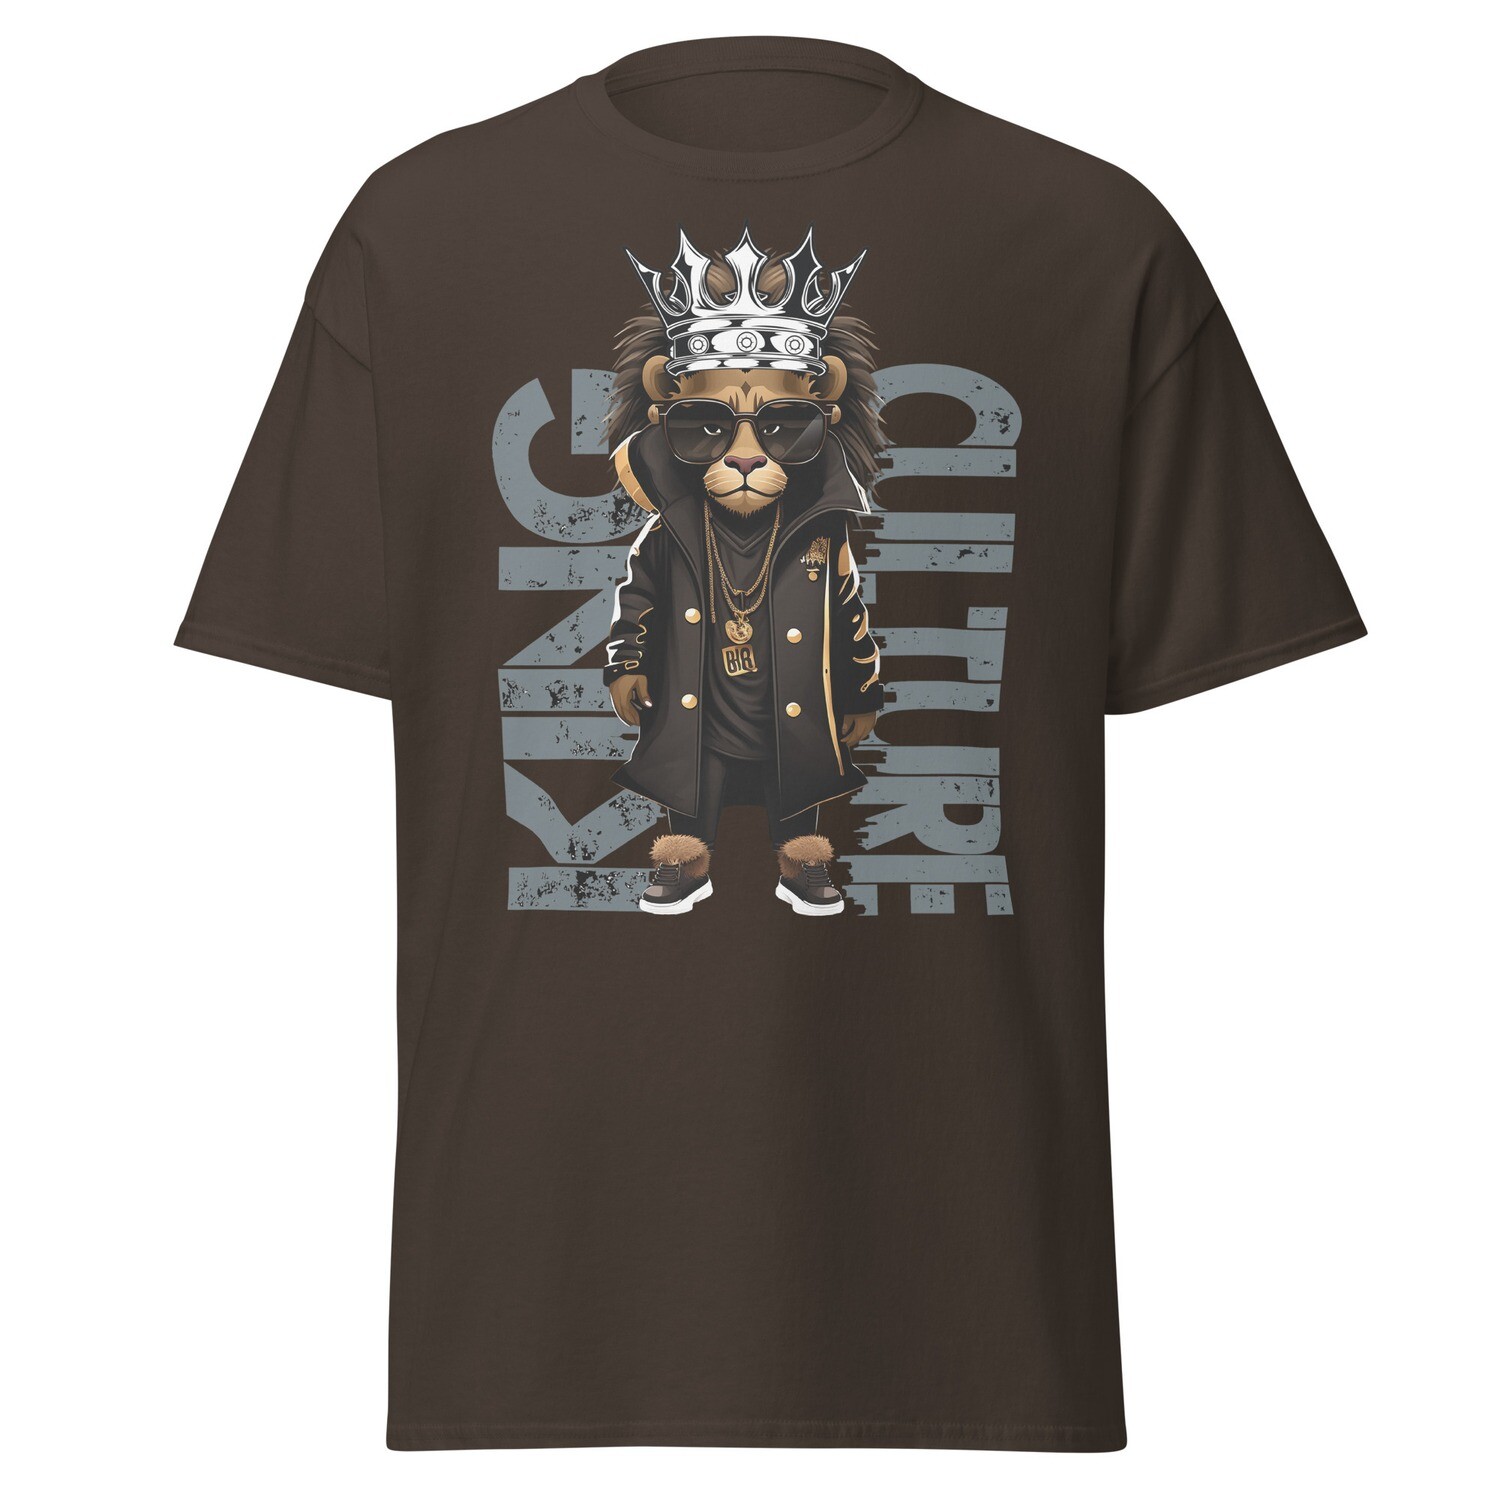 KING and Culture (Multiple Browns colors)